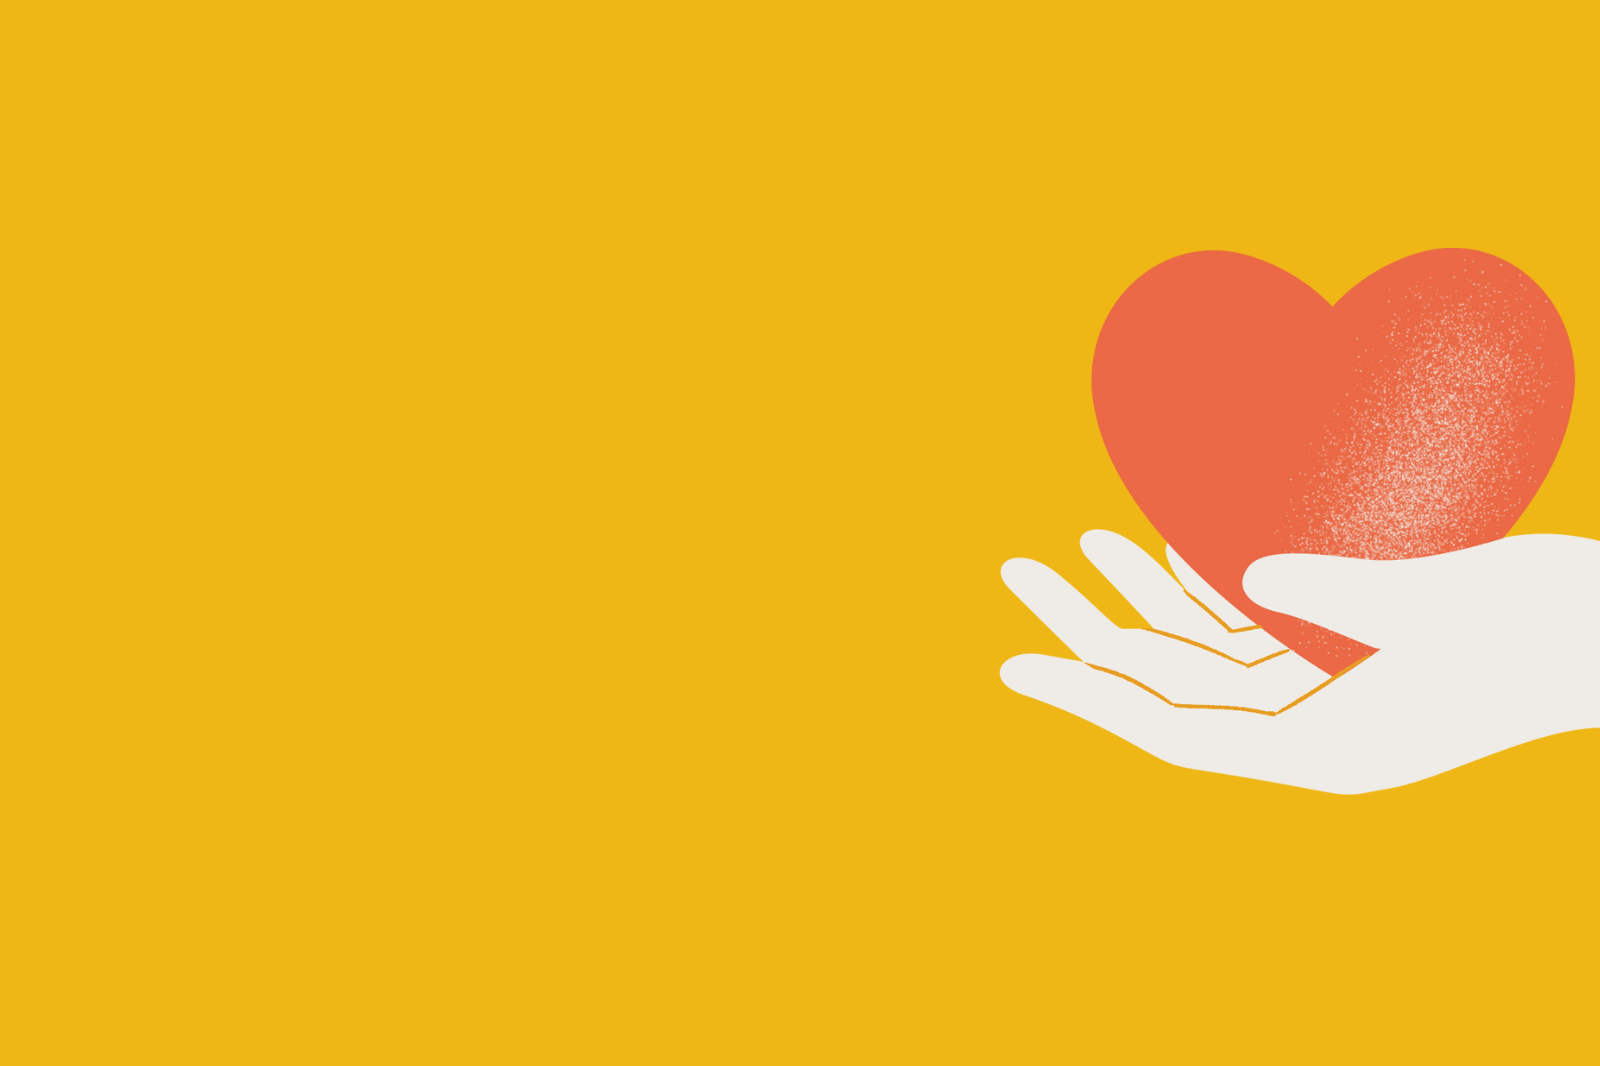 A heart held by a hand on a yellow background, designed to boost engagement with empathy.